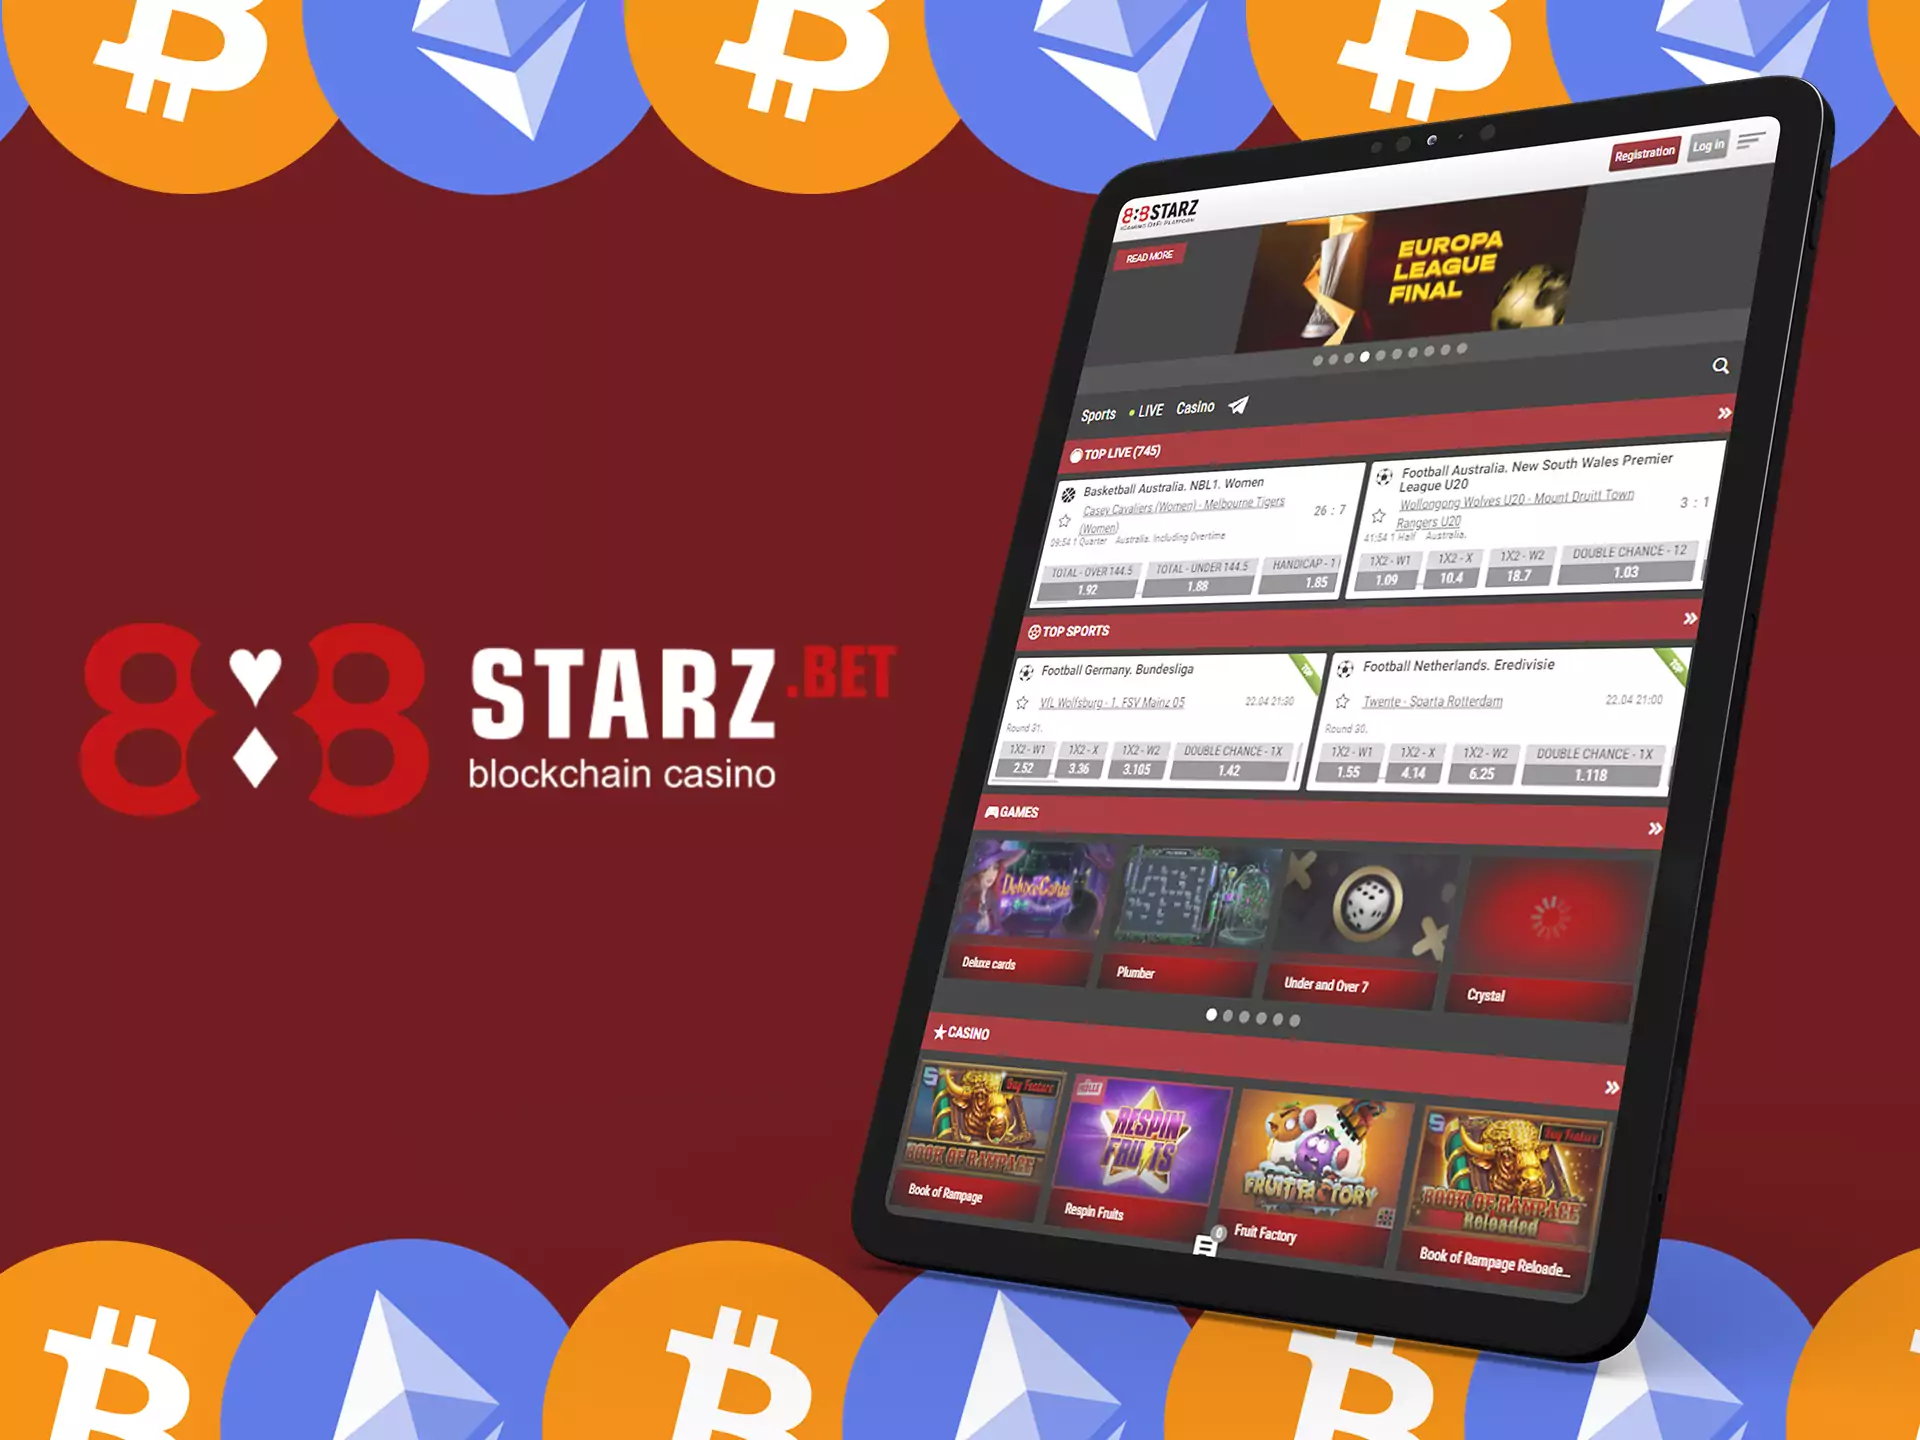 Use 888starz website version on unsupported for app devices.